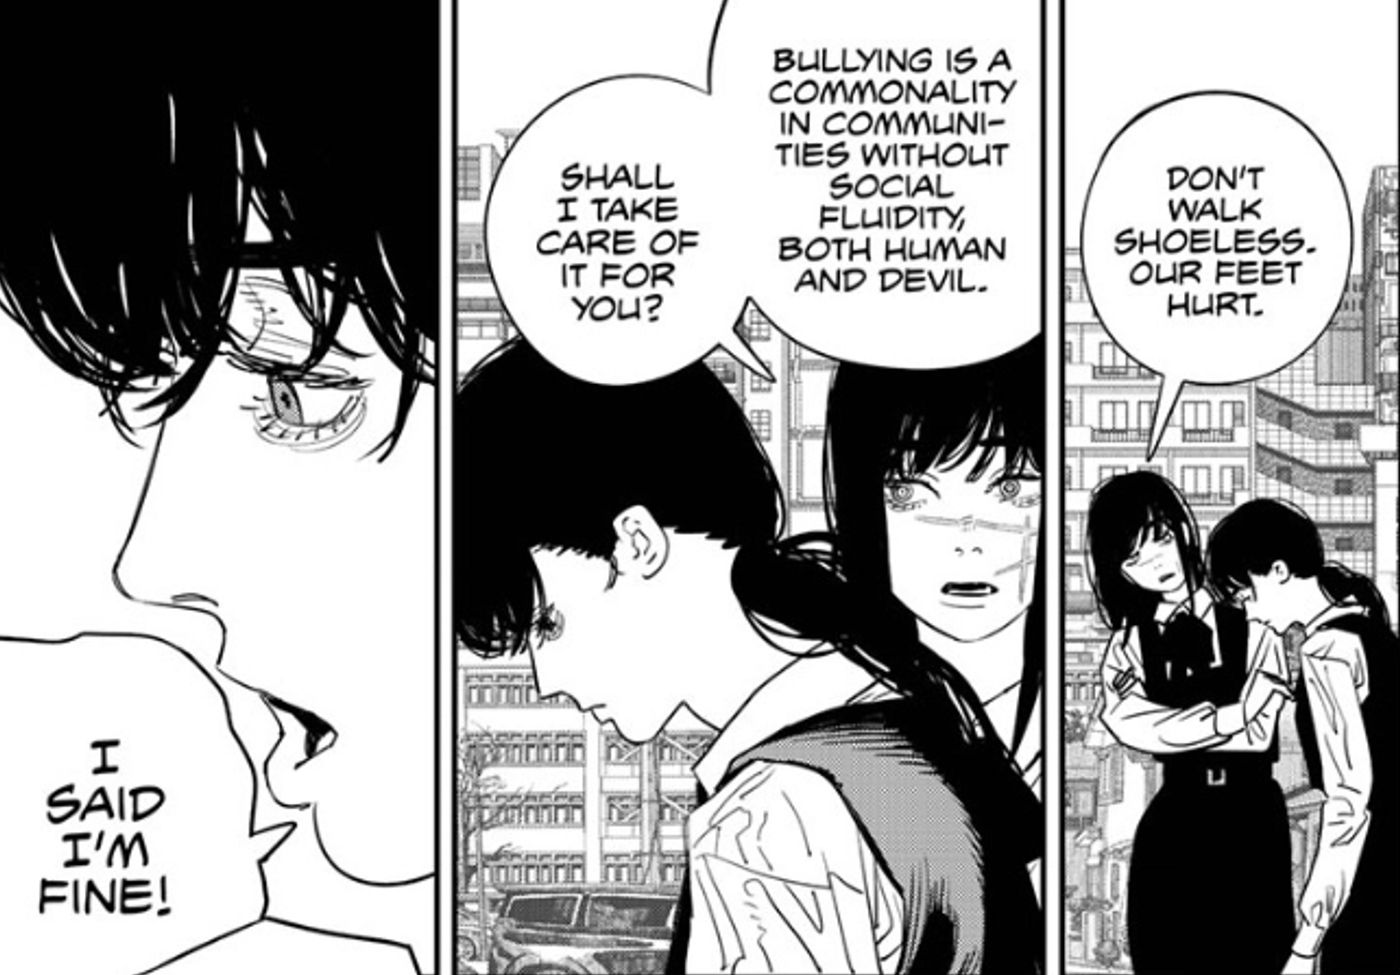 The War Devil is uncharacteristically kind to her host Asa Mitaka in Chainsaw Man chapter 100 by asking to take care of the bullies who had bullied Mitaka earlier